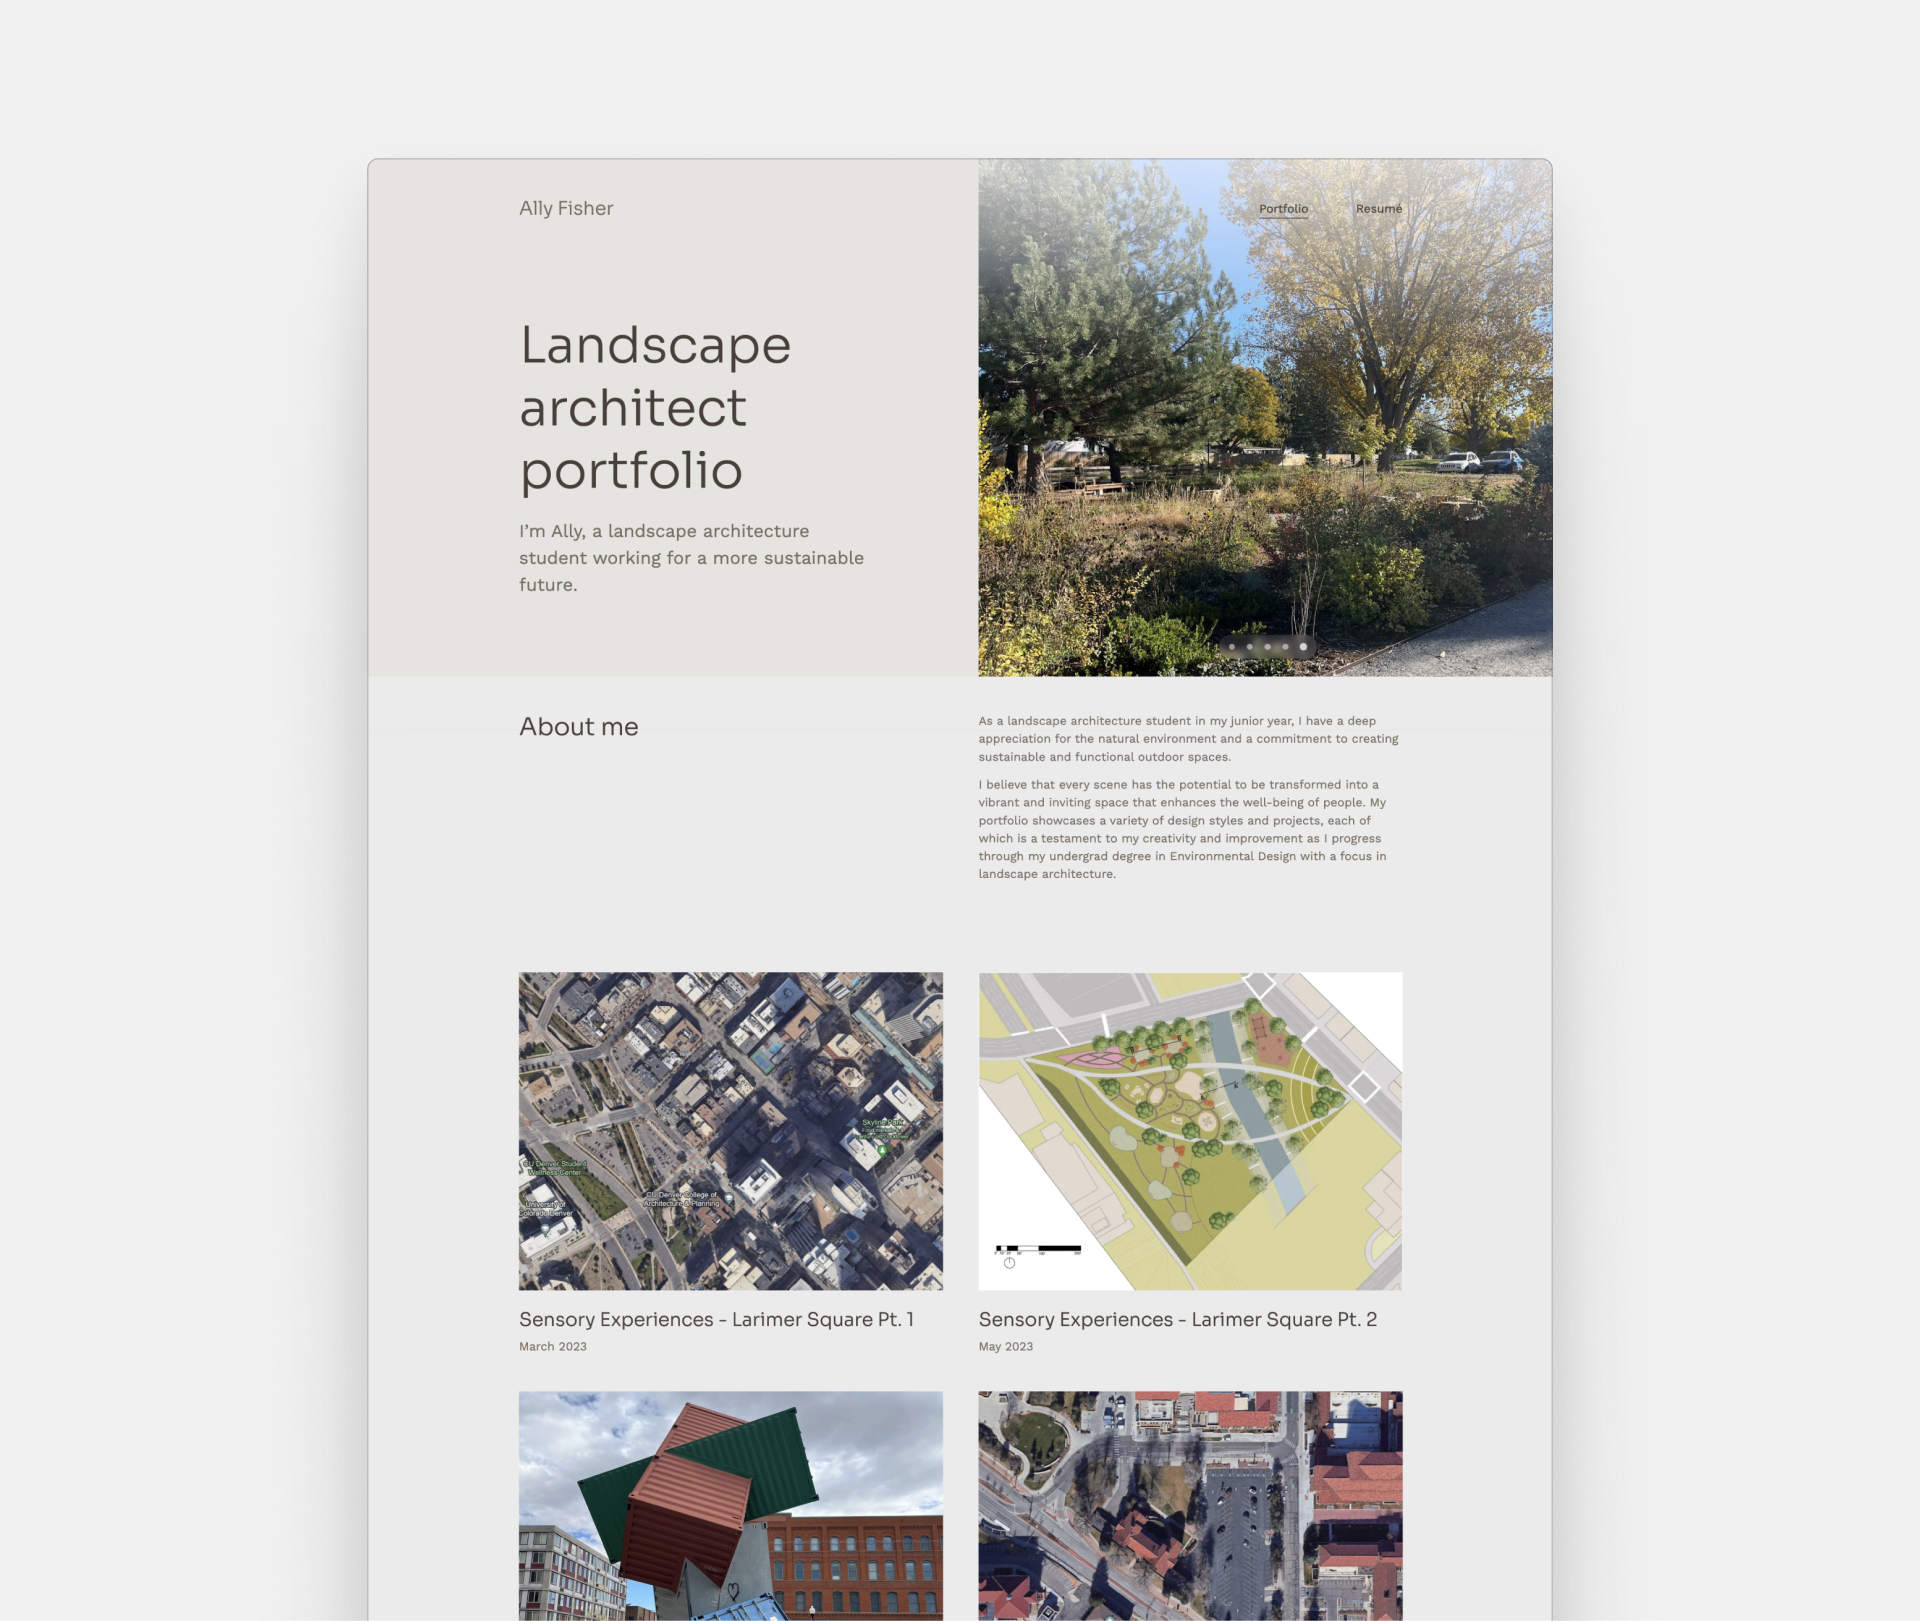 Screenshot of the landscape architect portfolio by Ally Fisher